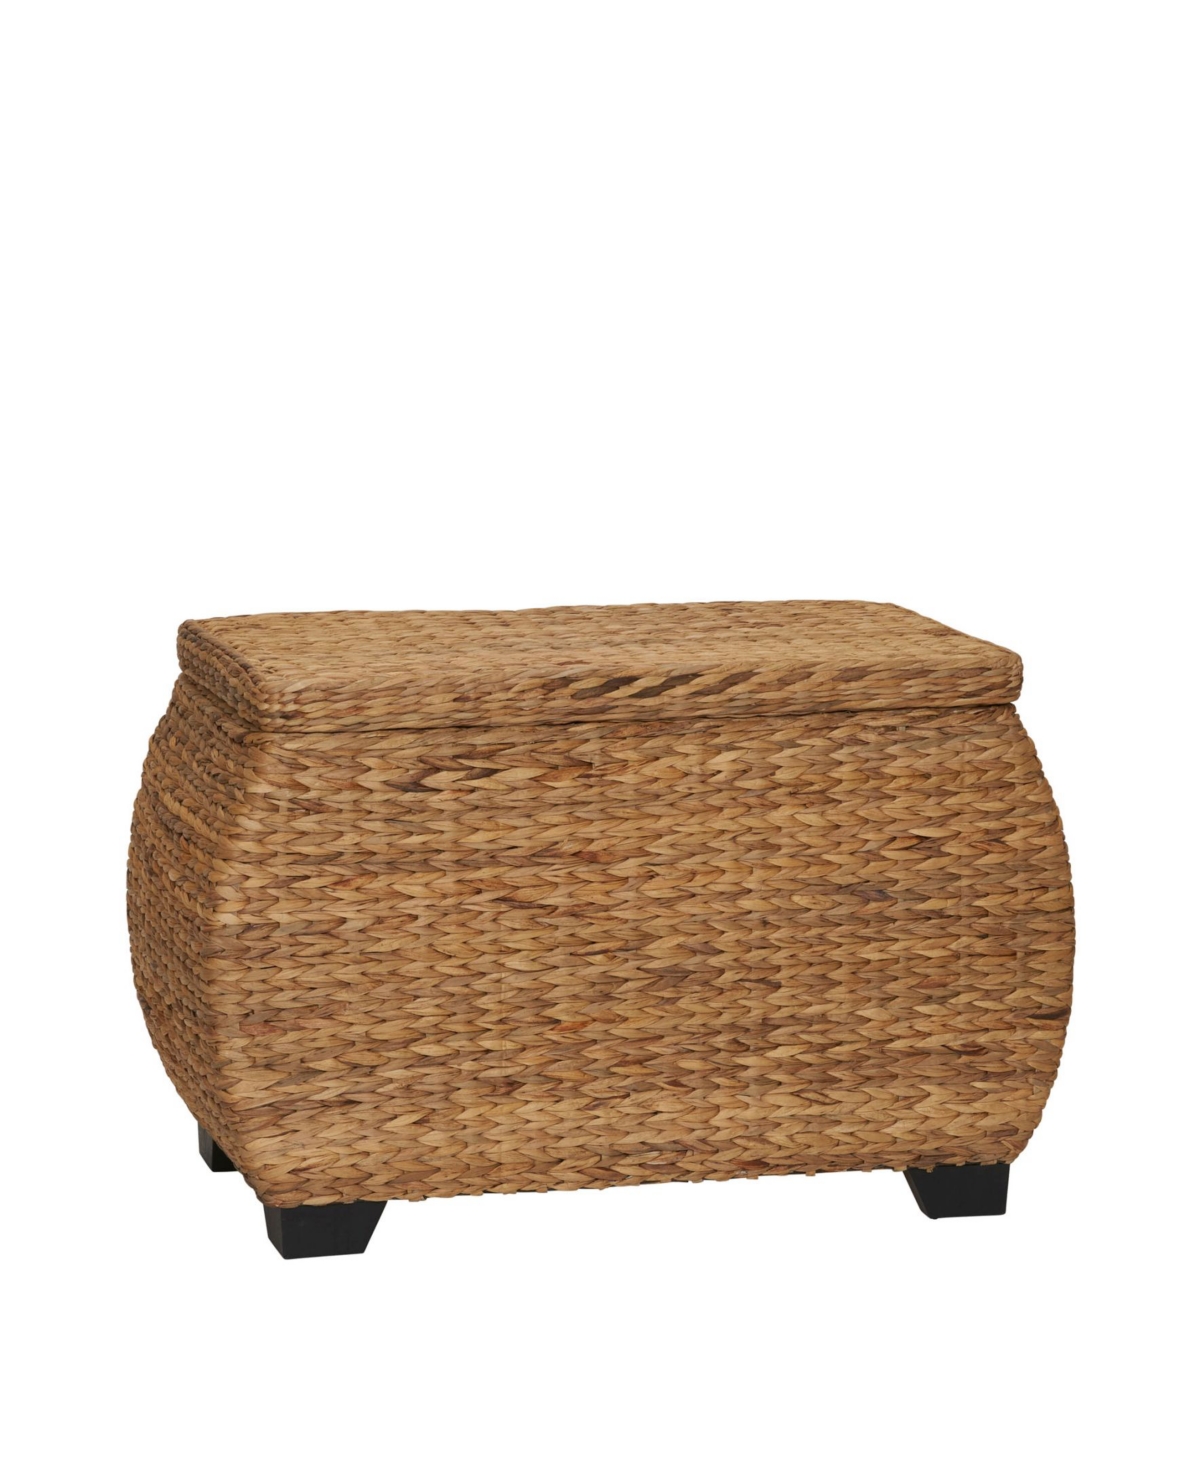 Household Essential Large Curved Wicker Storage Chest with Liner Water Hyacinth - Brown